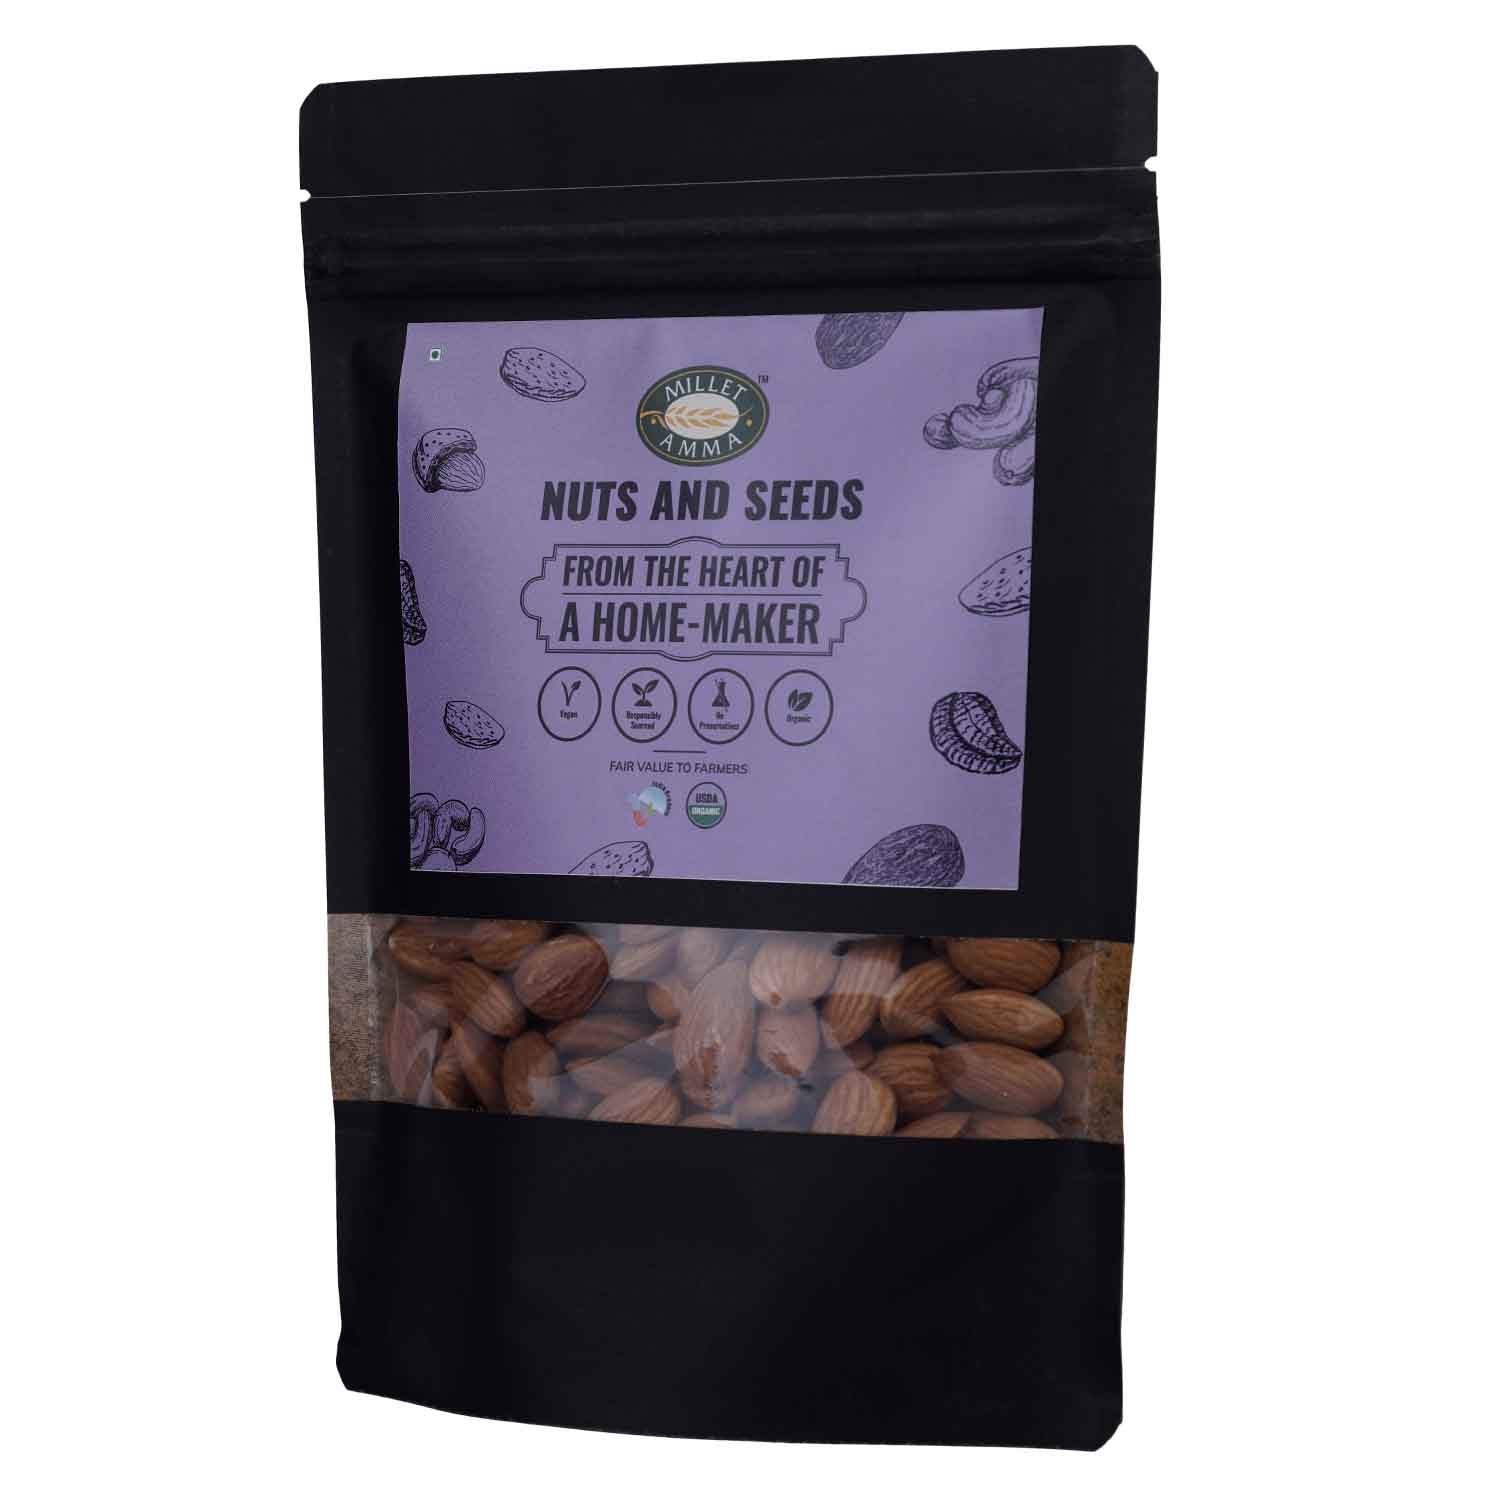 Millet Amma’s Organic Almonds (Badam)- Millet Amma’s Organic Almonds is a nutritious snack that you munch on guilt-free.  Almonds deliver a massive amount of nutrients. They are high in antioxidants, protein, fiber and calcium.  They have been proven to help cure spasms and pain.